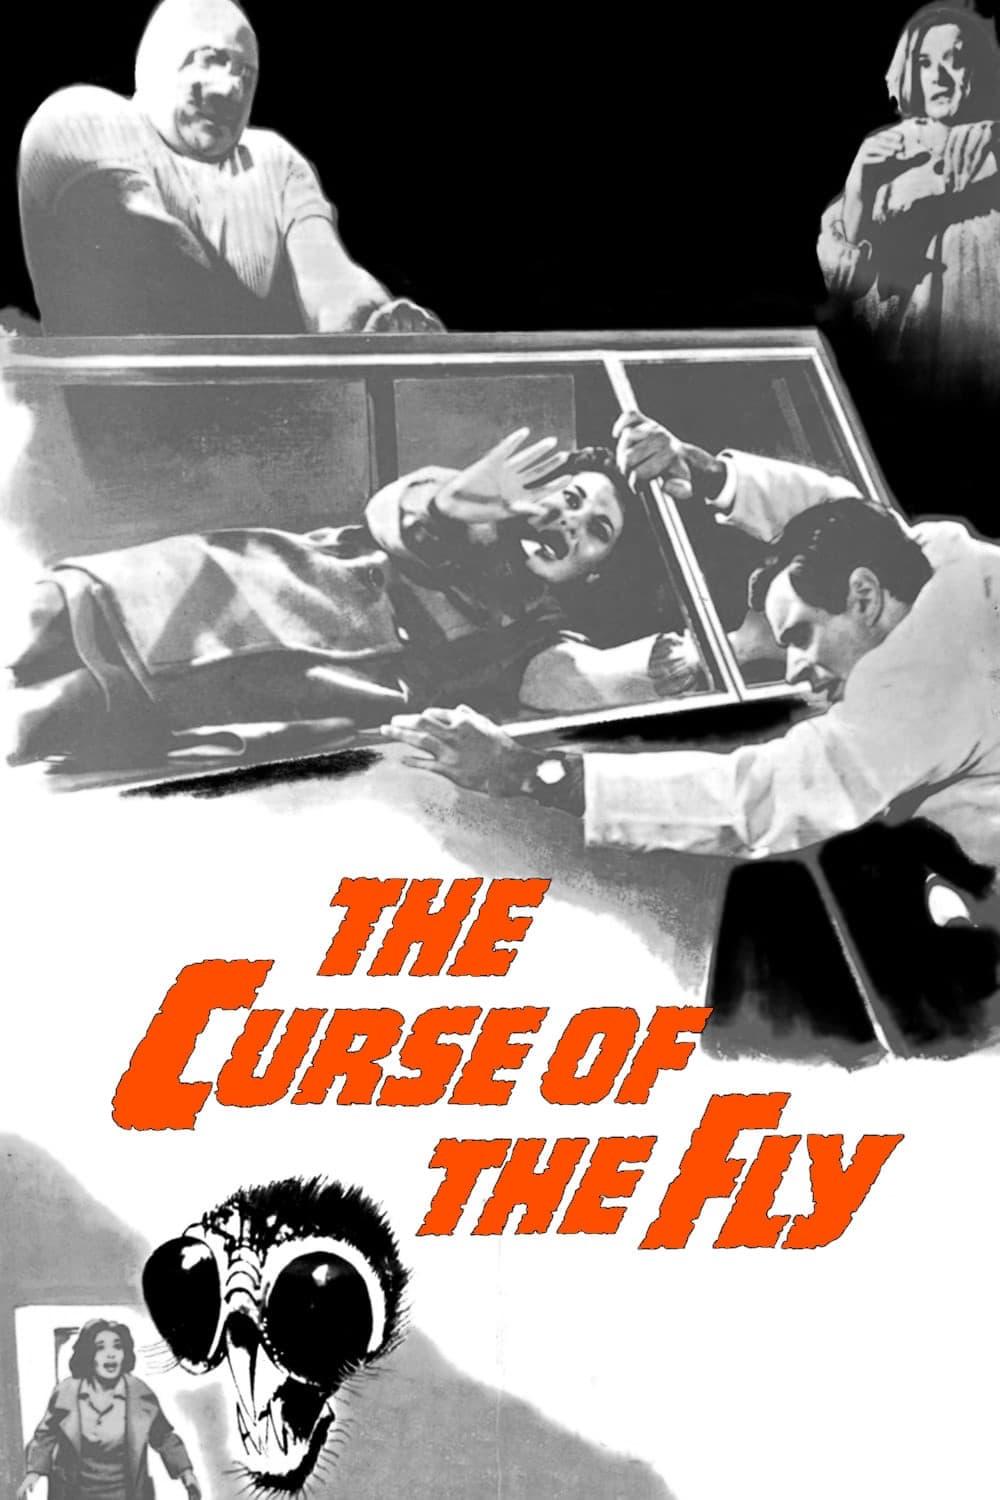 Curse of the Fly poster